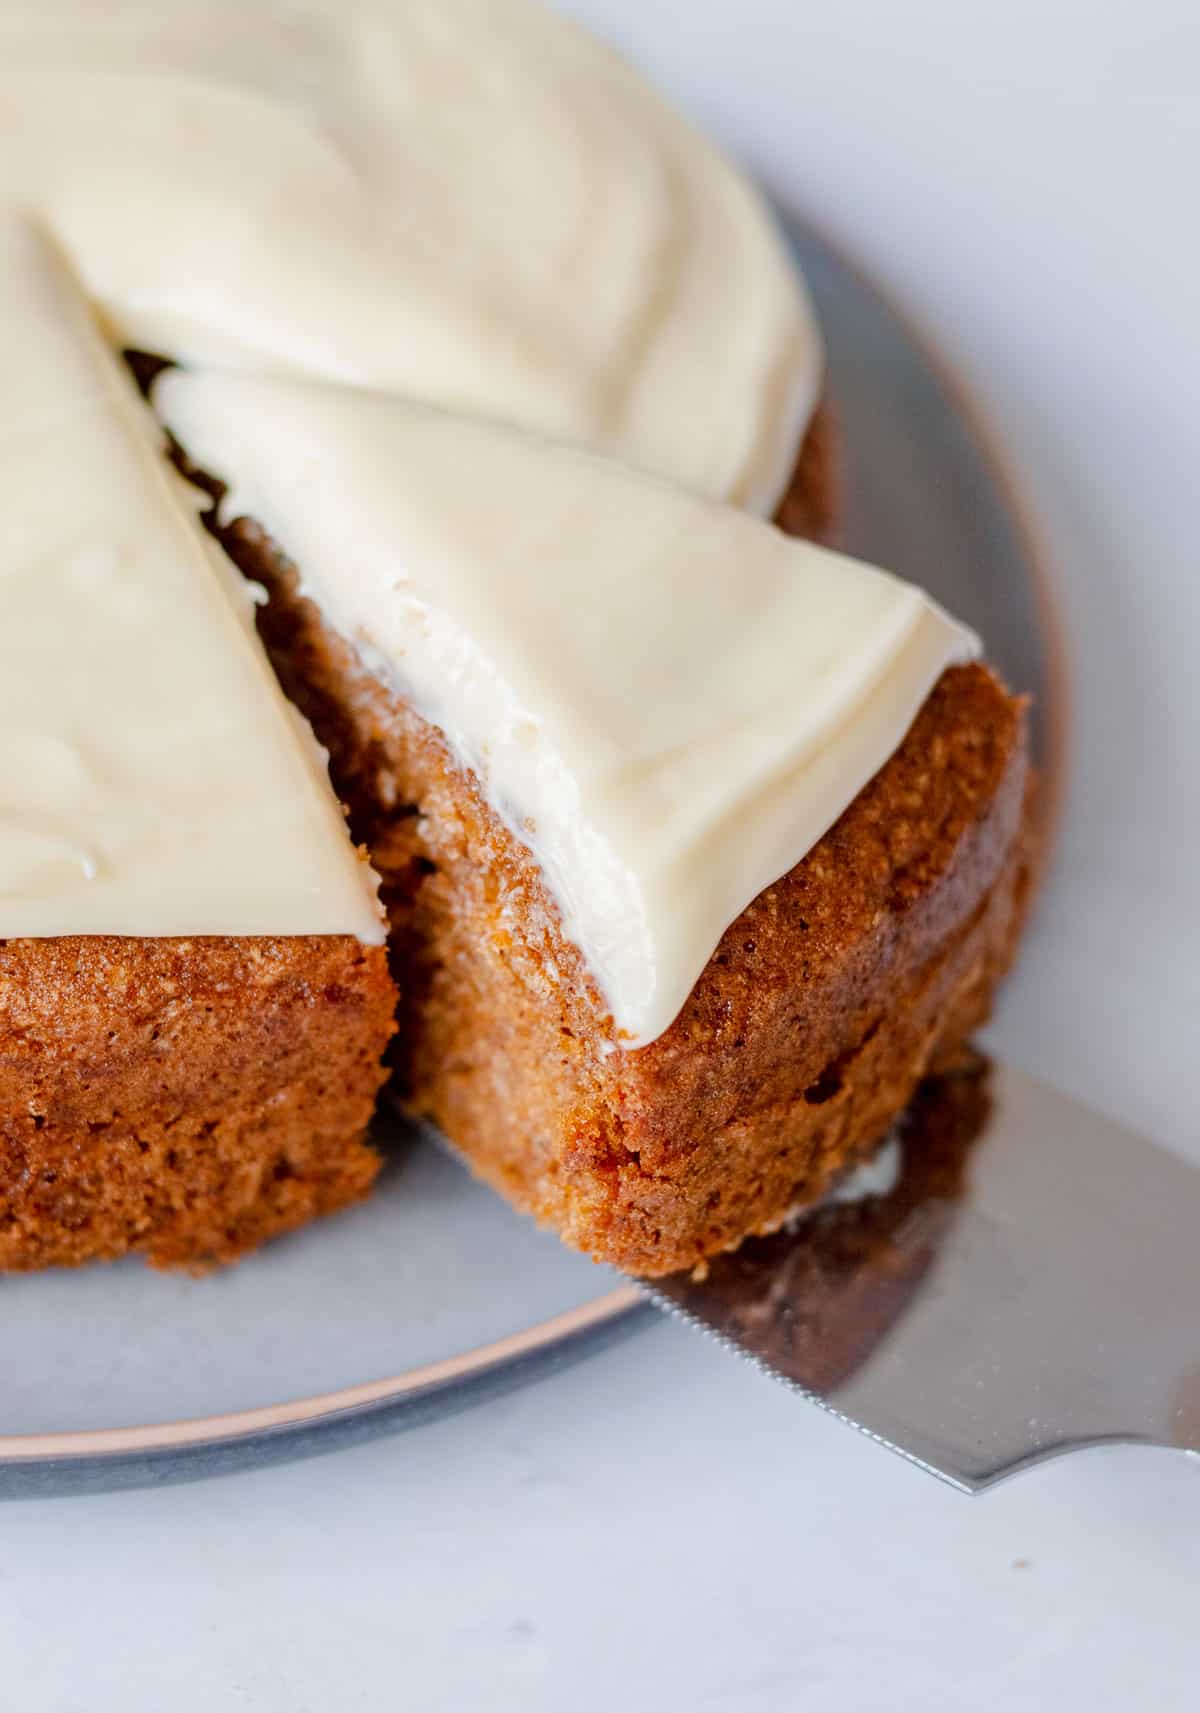  A slice of carrot cake with cream cheese icing.